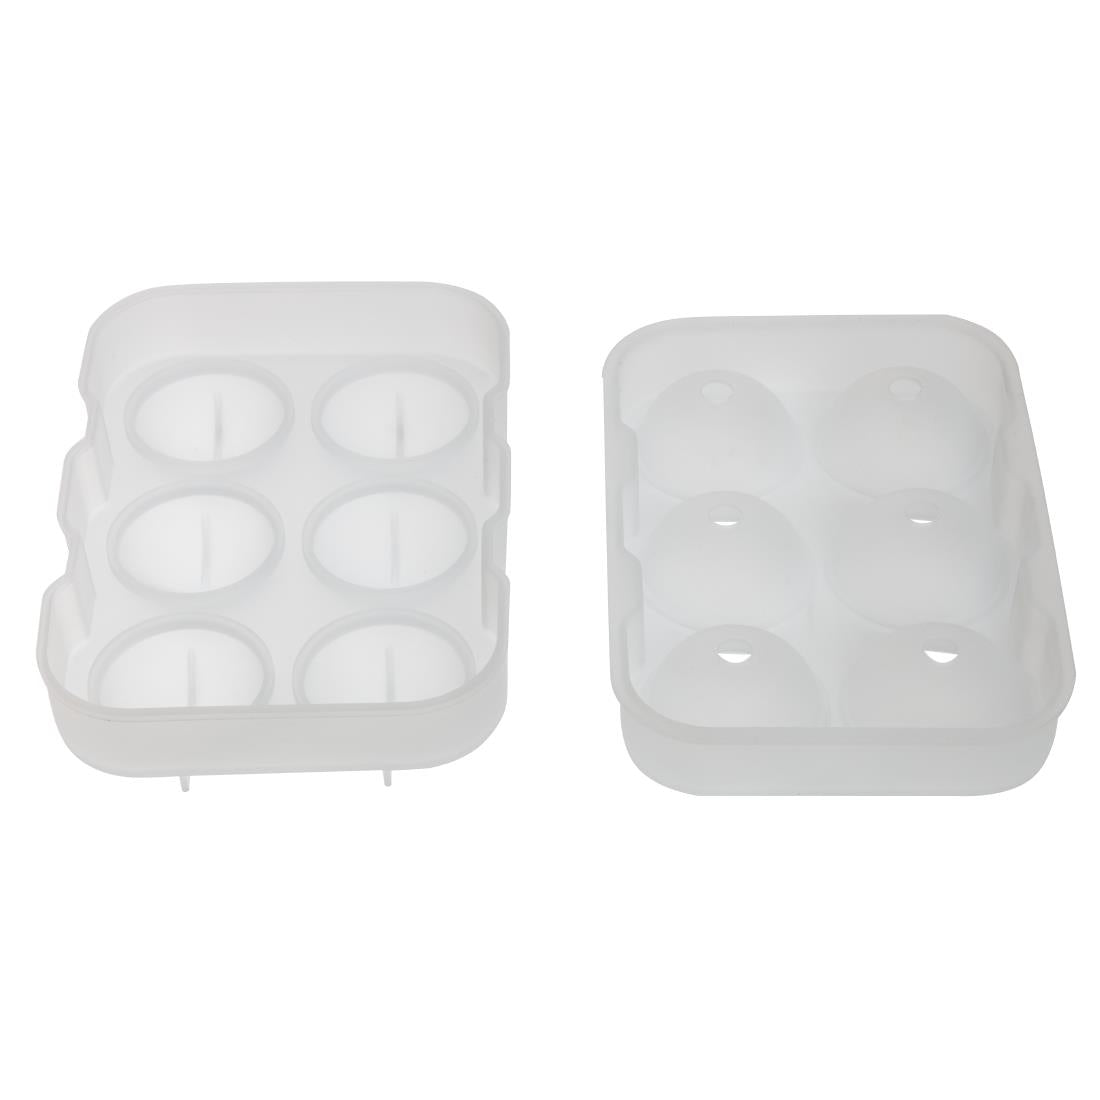 CN938 Beaumont Silicone Ice Ball Mould